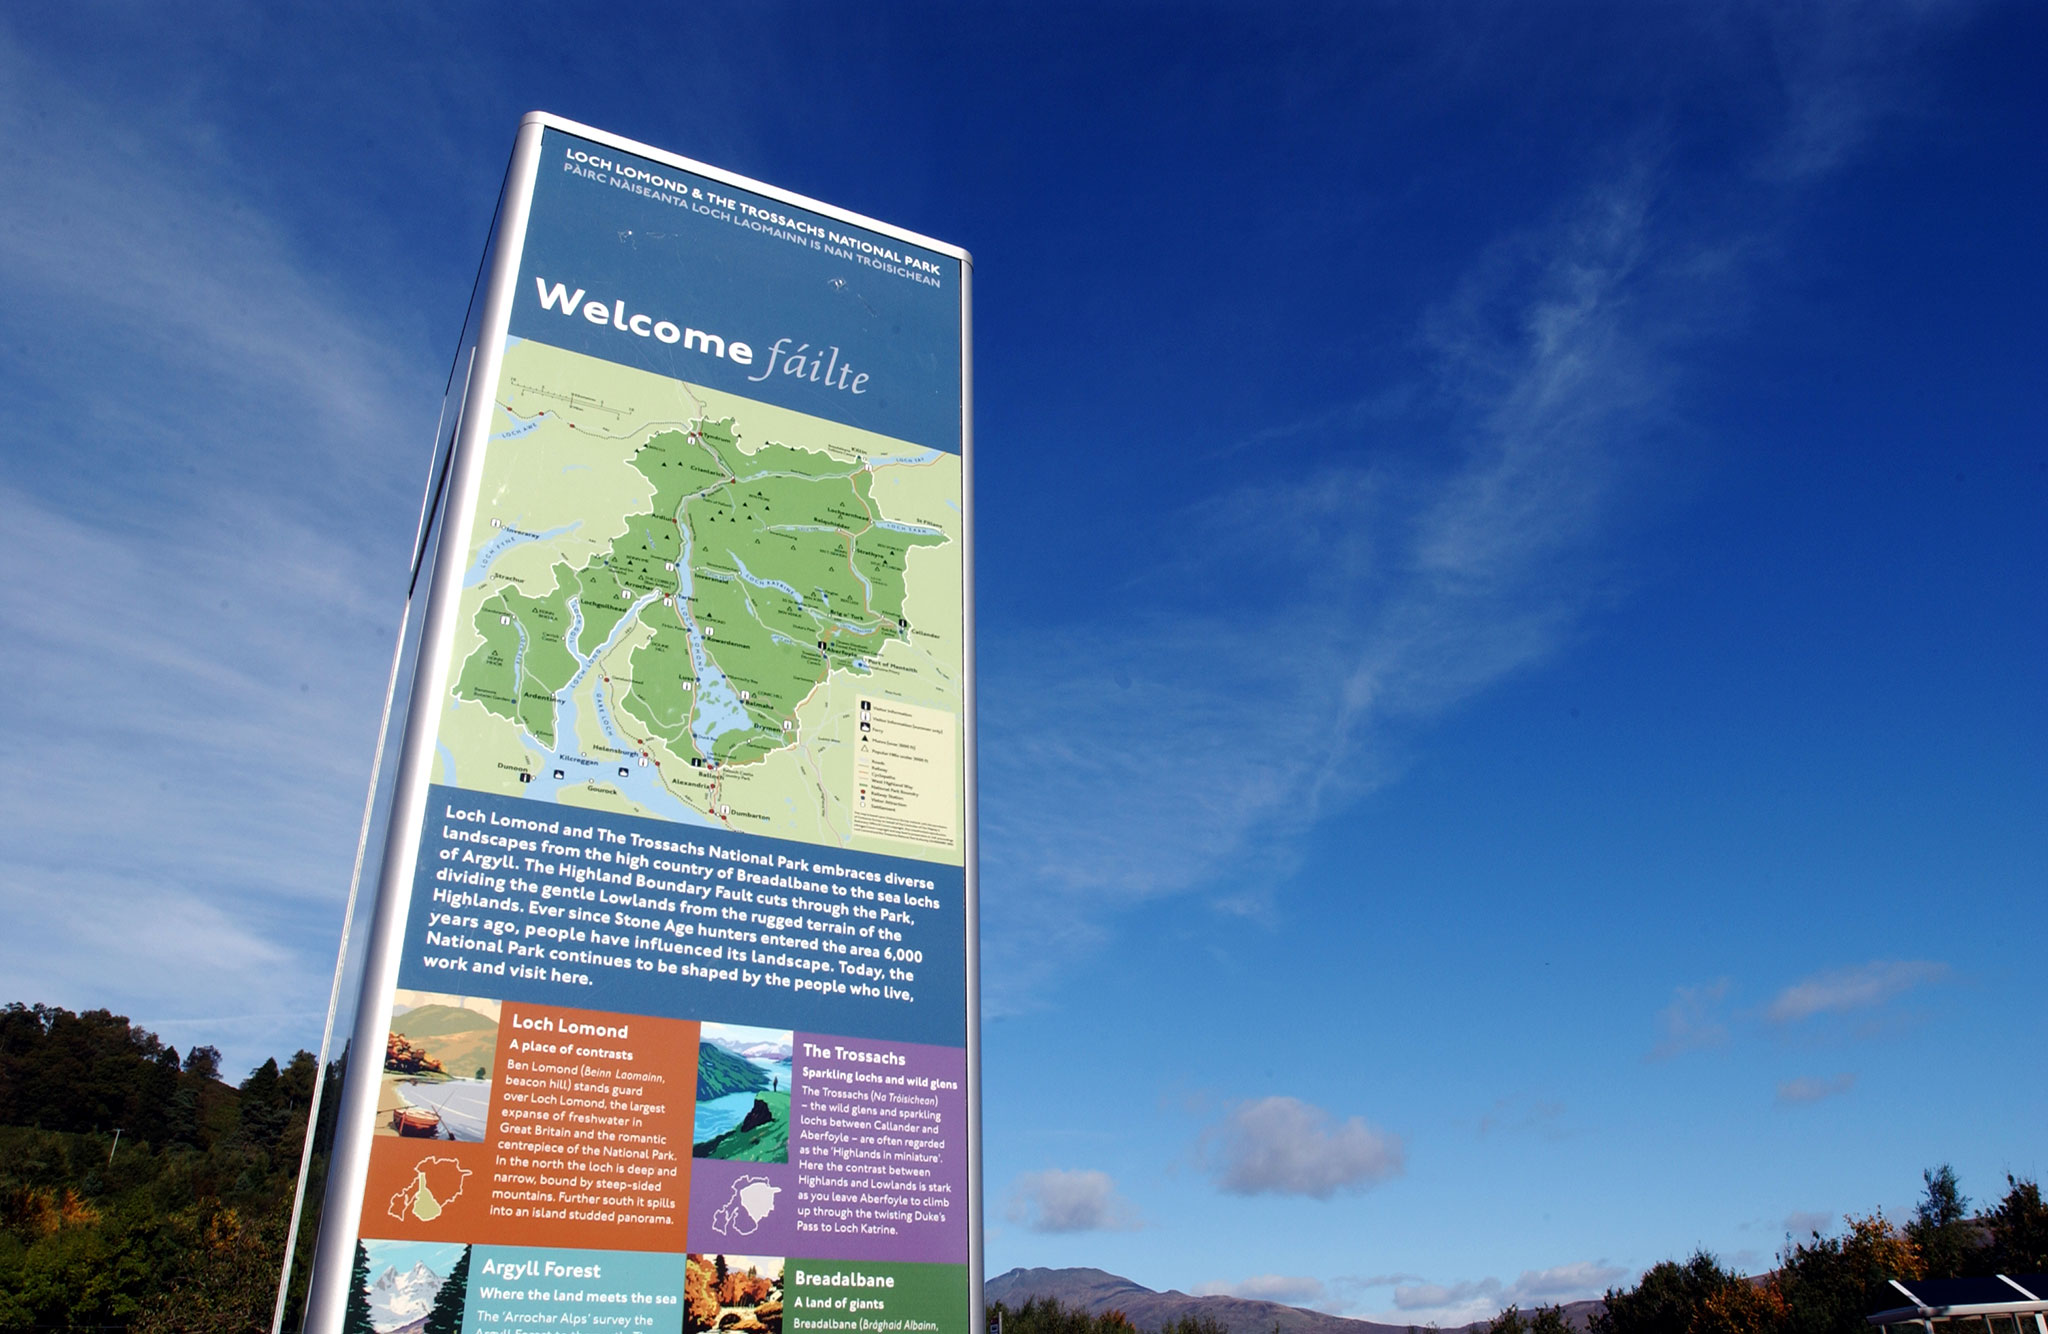 Loch Lomond and Loch Lomond and The Trossachs National Park signage